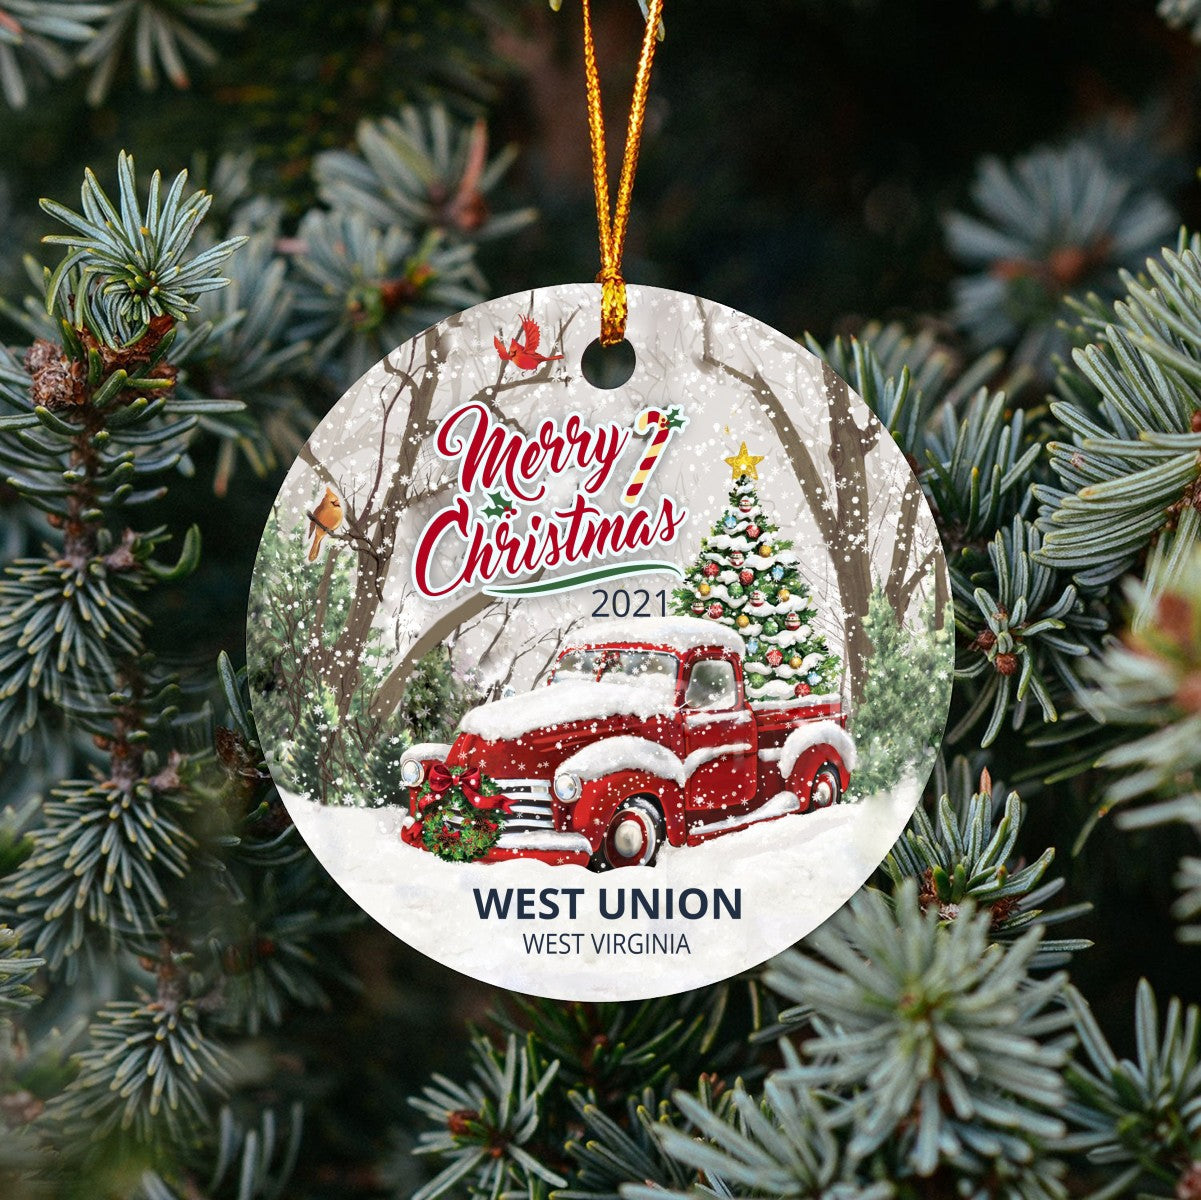 Christmas Tree Ornaments West Union - Ornament With Name City, State West Union West Virginia WV Ornament - Red Truck Xmas Ornaments 3'' Plastic Gift For Family, Friend And Housewarming